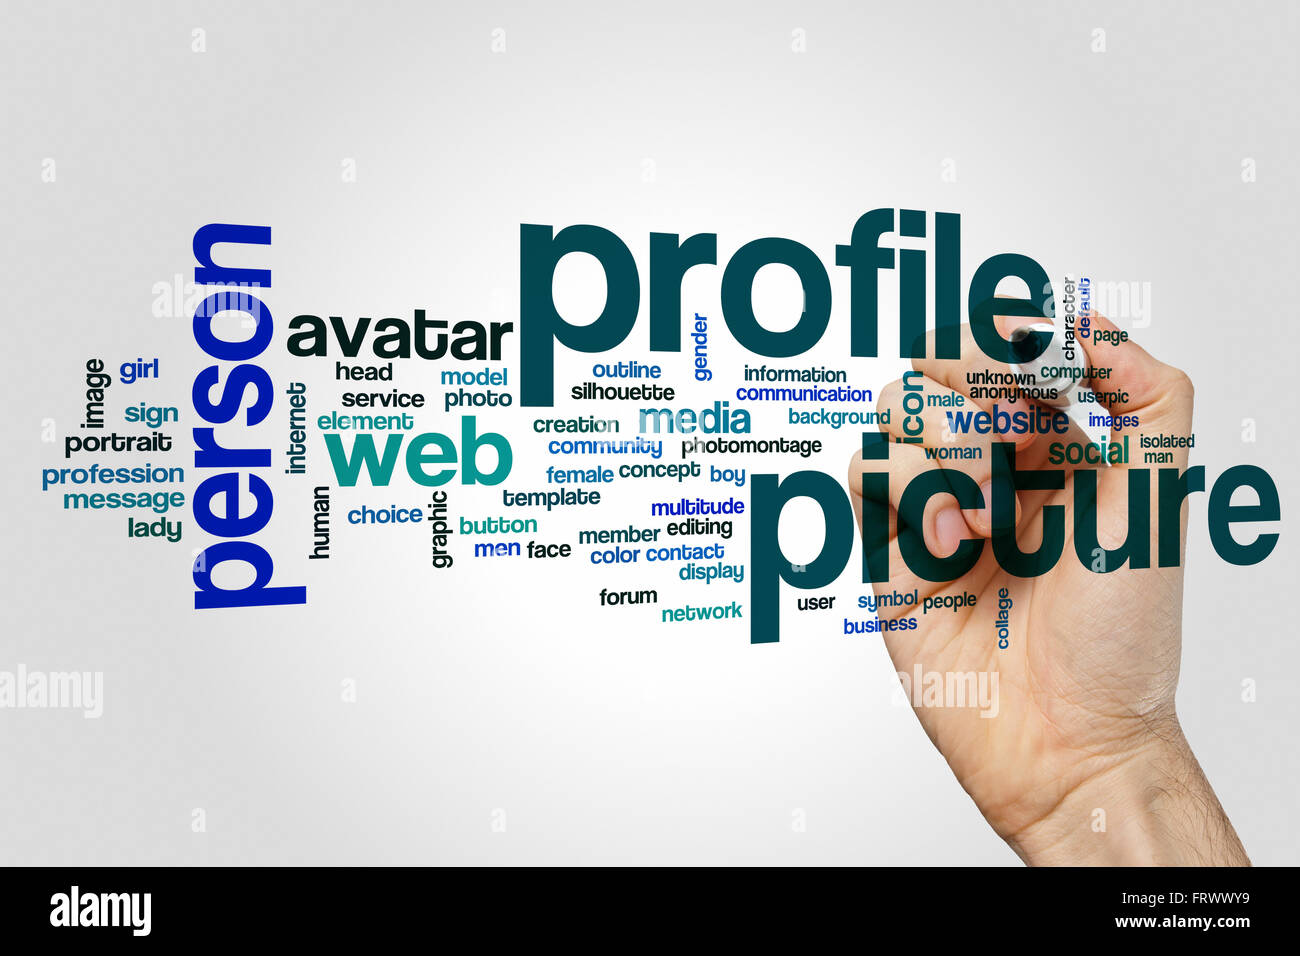 Profile picture word cloud Stock Photo